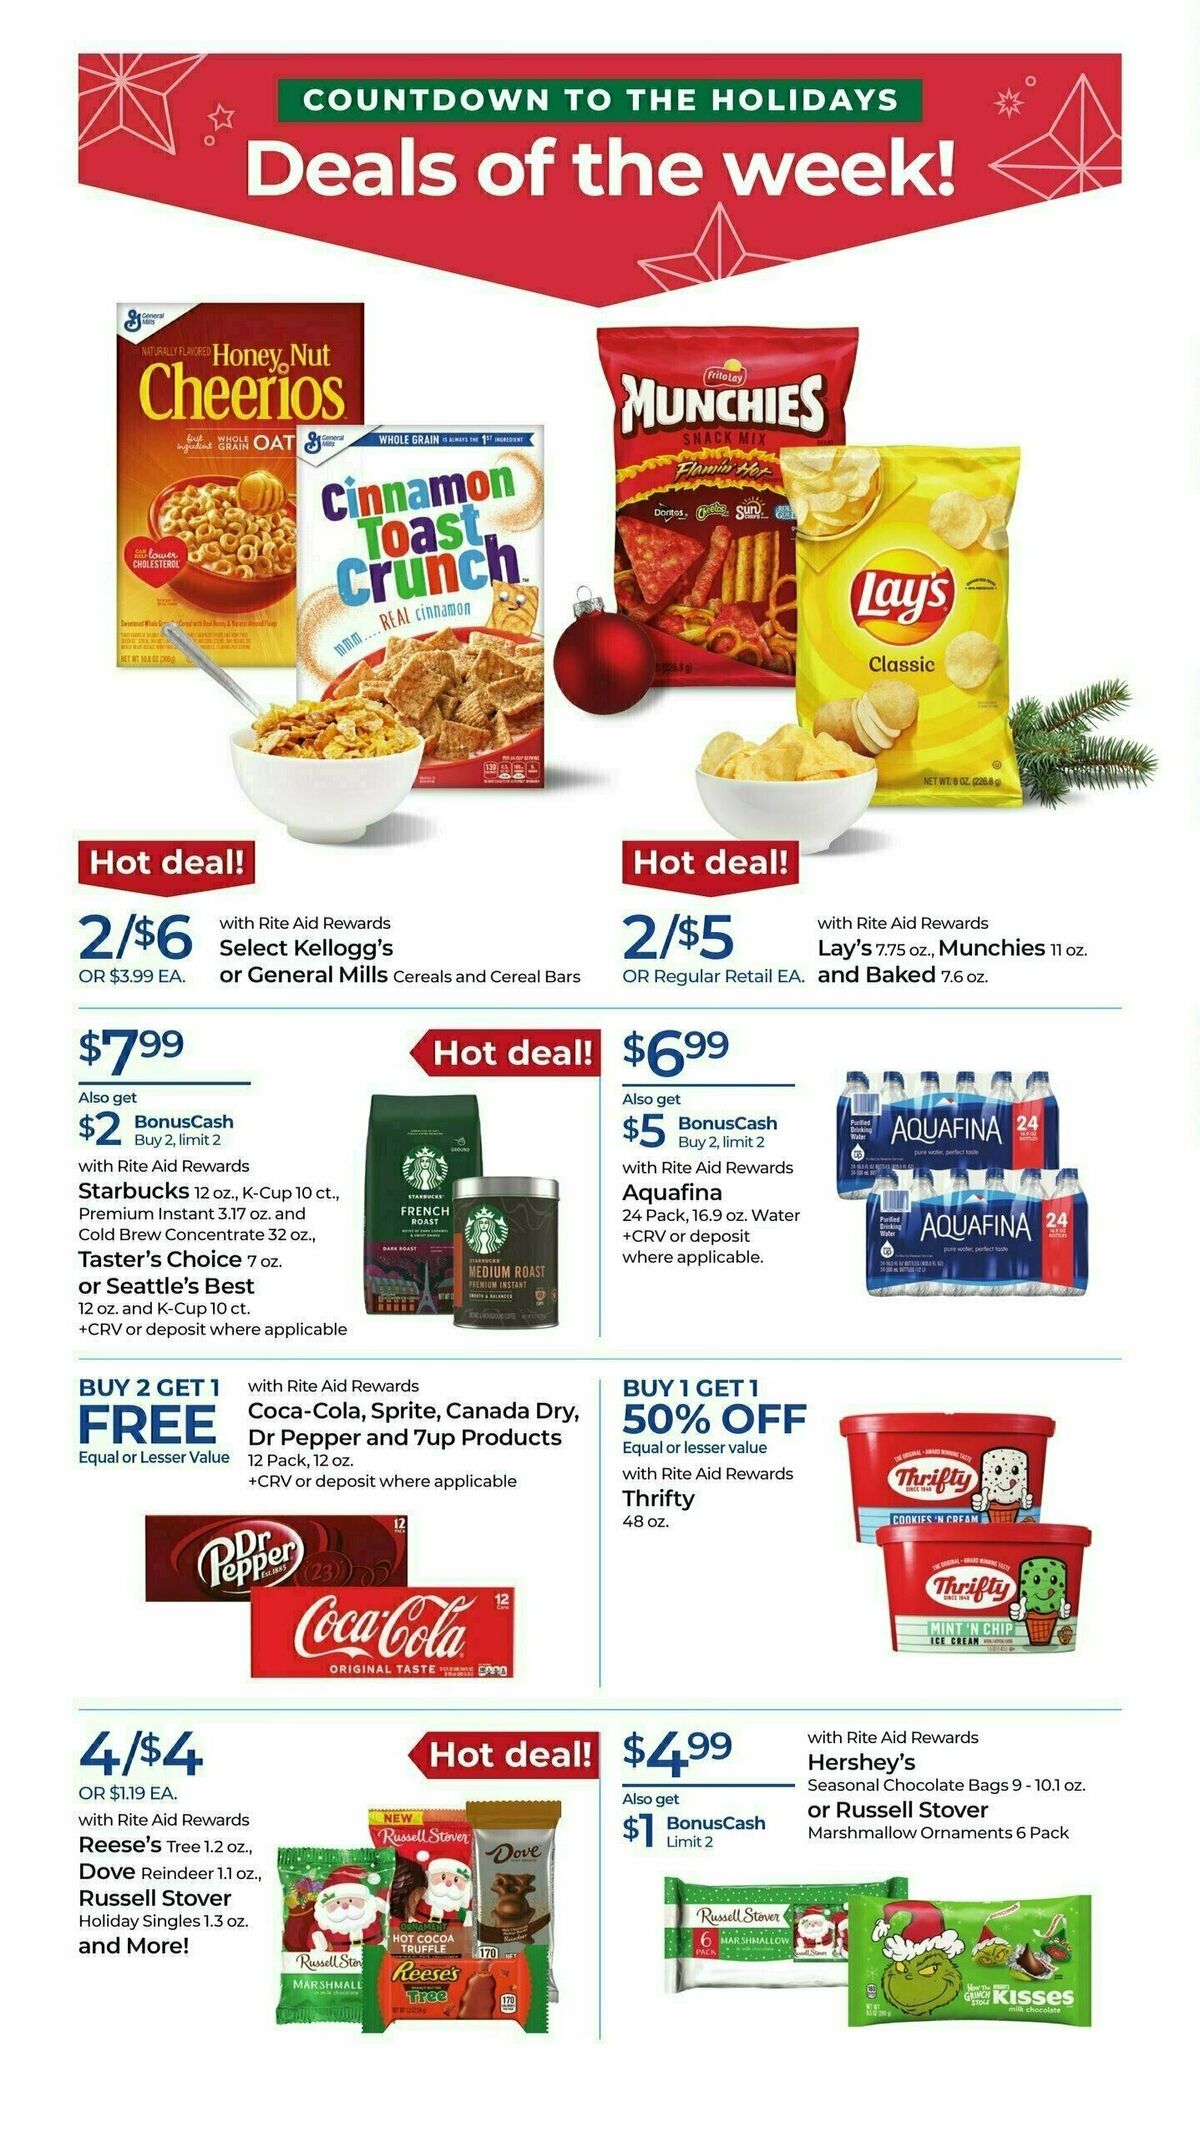 Rite Aid Weekly Ad from November 5